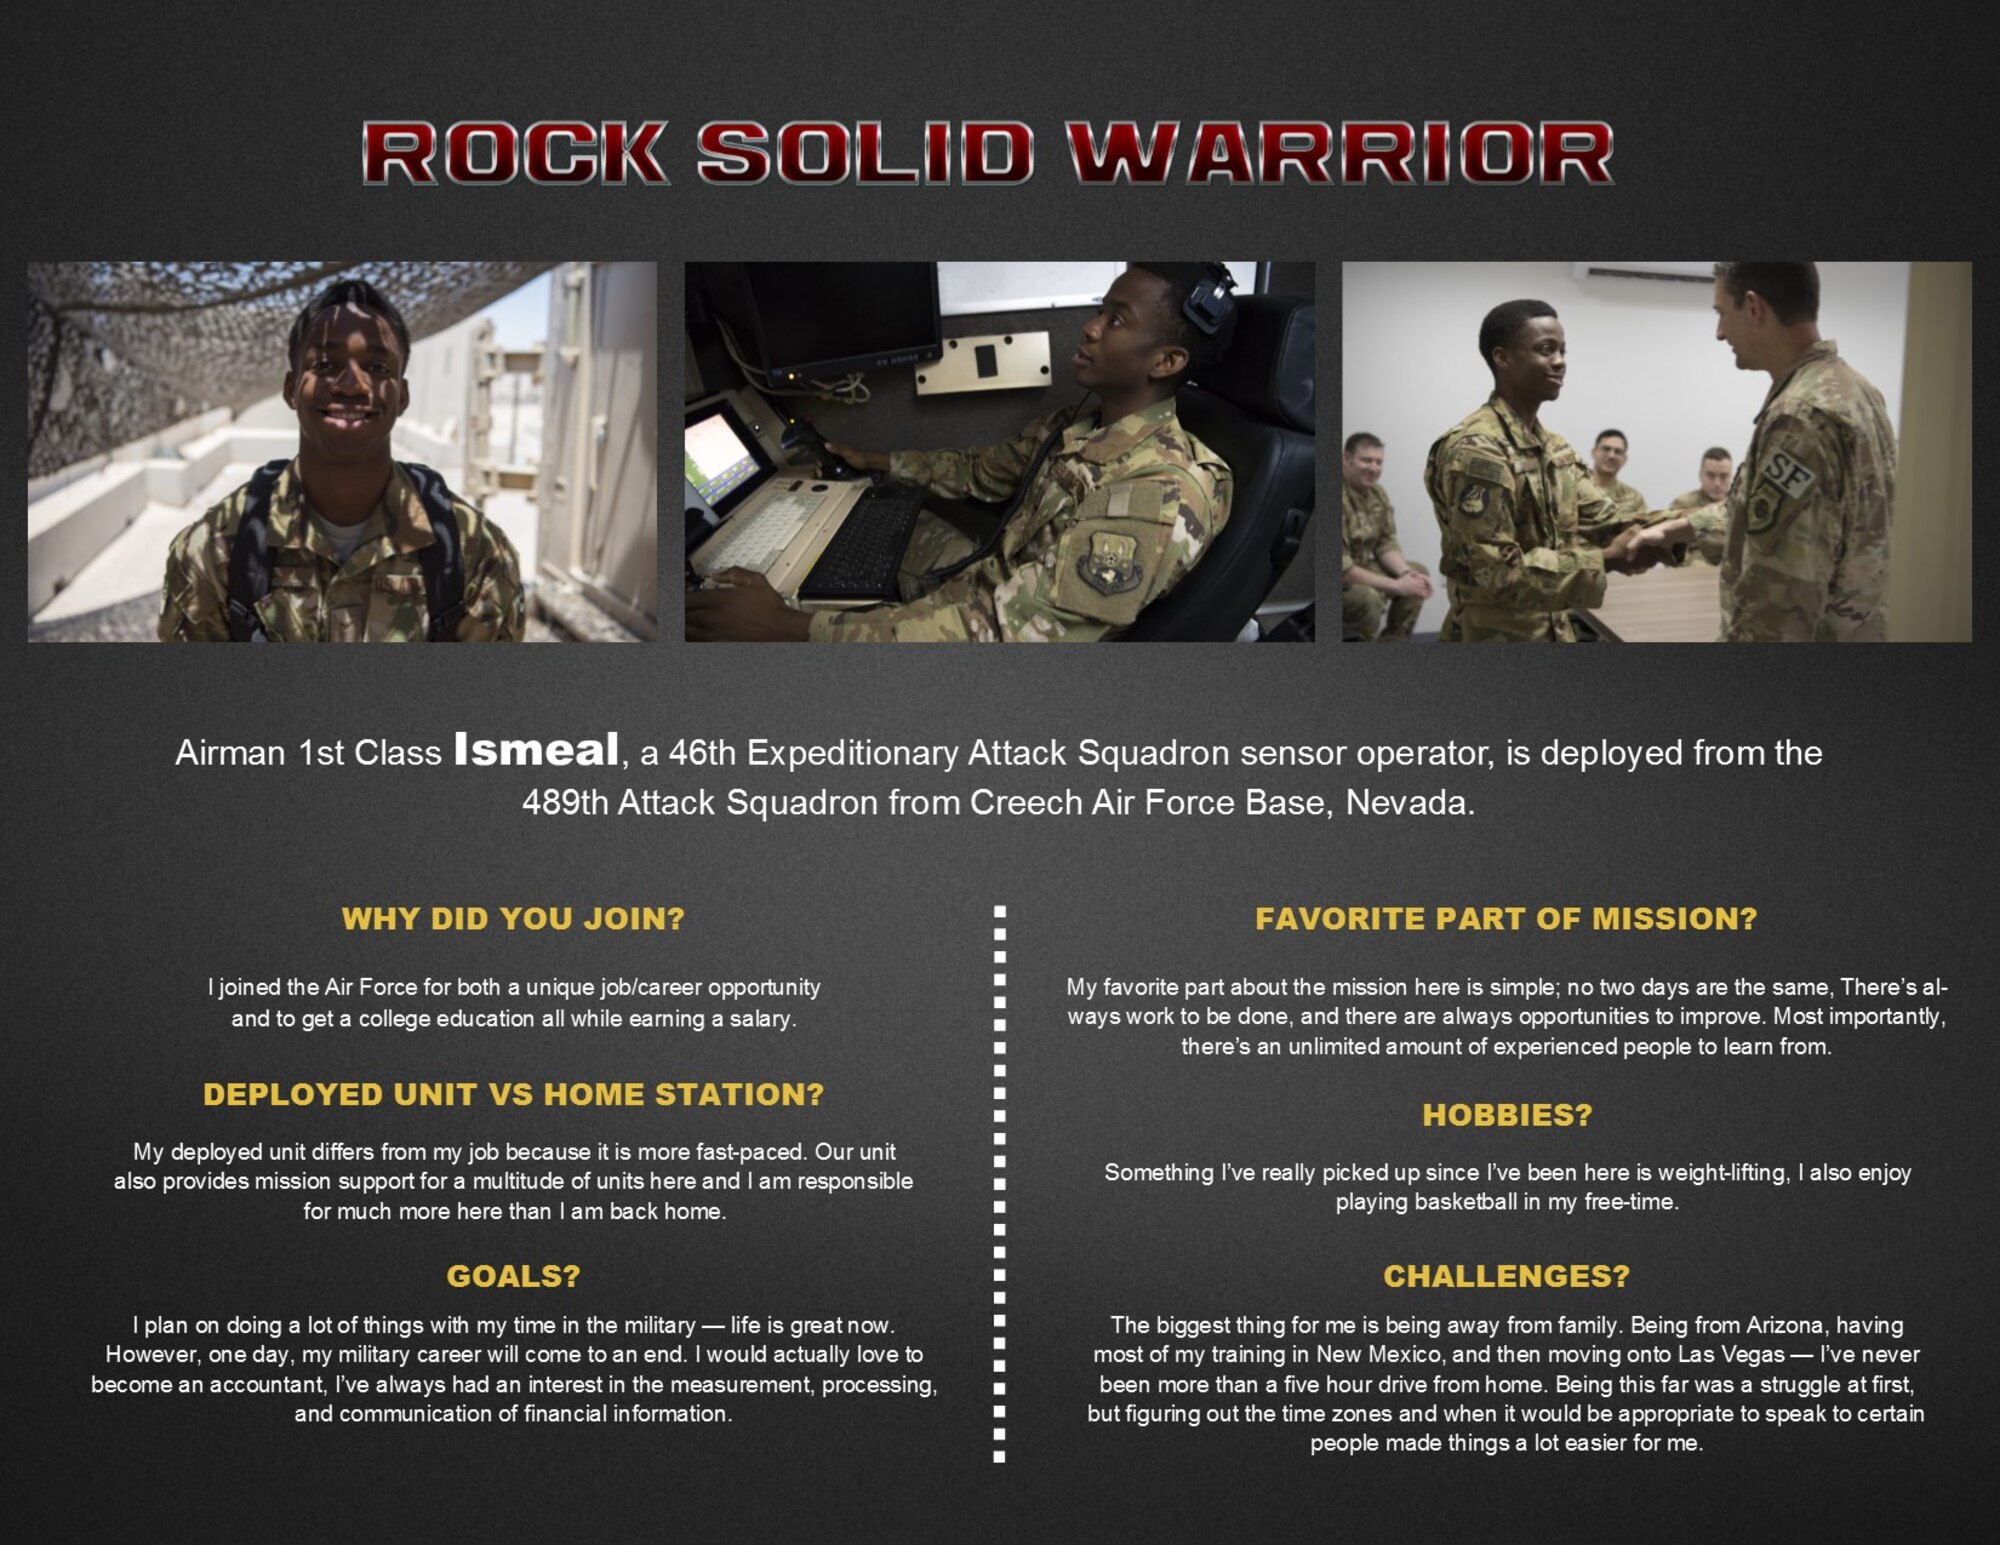 This week's Rock Solid Warrior is Airman 1st Class Ismeal, 46th Attach Squadron sensor operator. The Rock Solid Warrior program is a way to recognize and spotlight the Airmen of the 386th Air Expeditionary Wing for their positive impact and commitment to the mission. (U.S Air Force graphic by Staff Sgt. Christopher Stoltz)